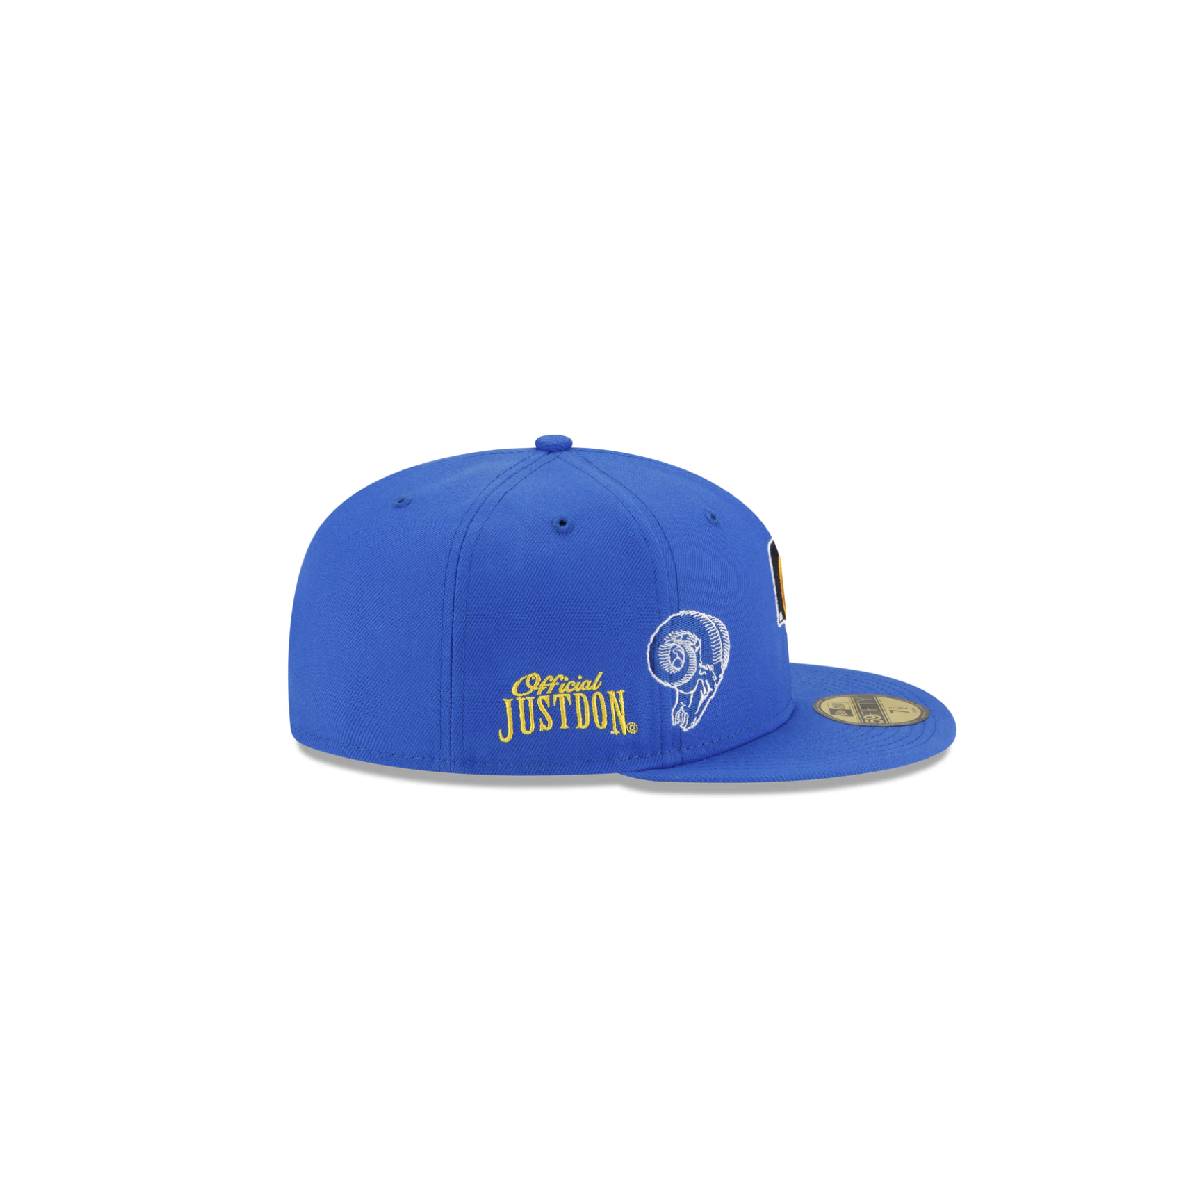 New Era 59Fifty Just Don x Los Angeles Rams Fitted Hat Royal Blue - KickzStore